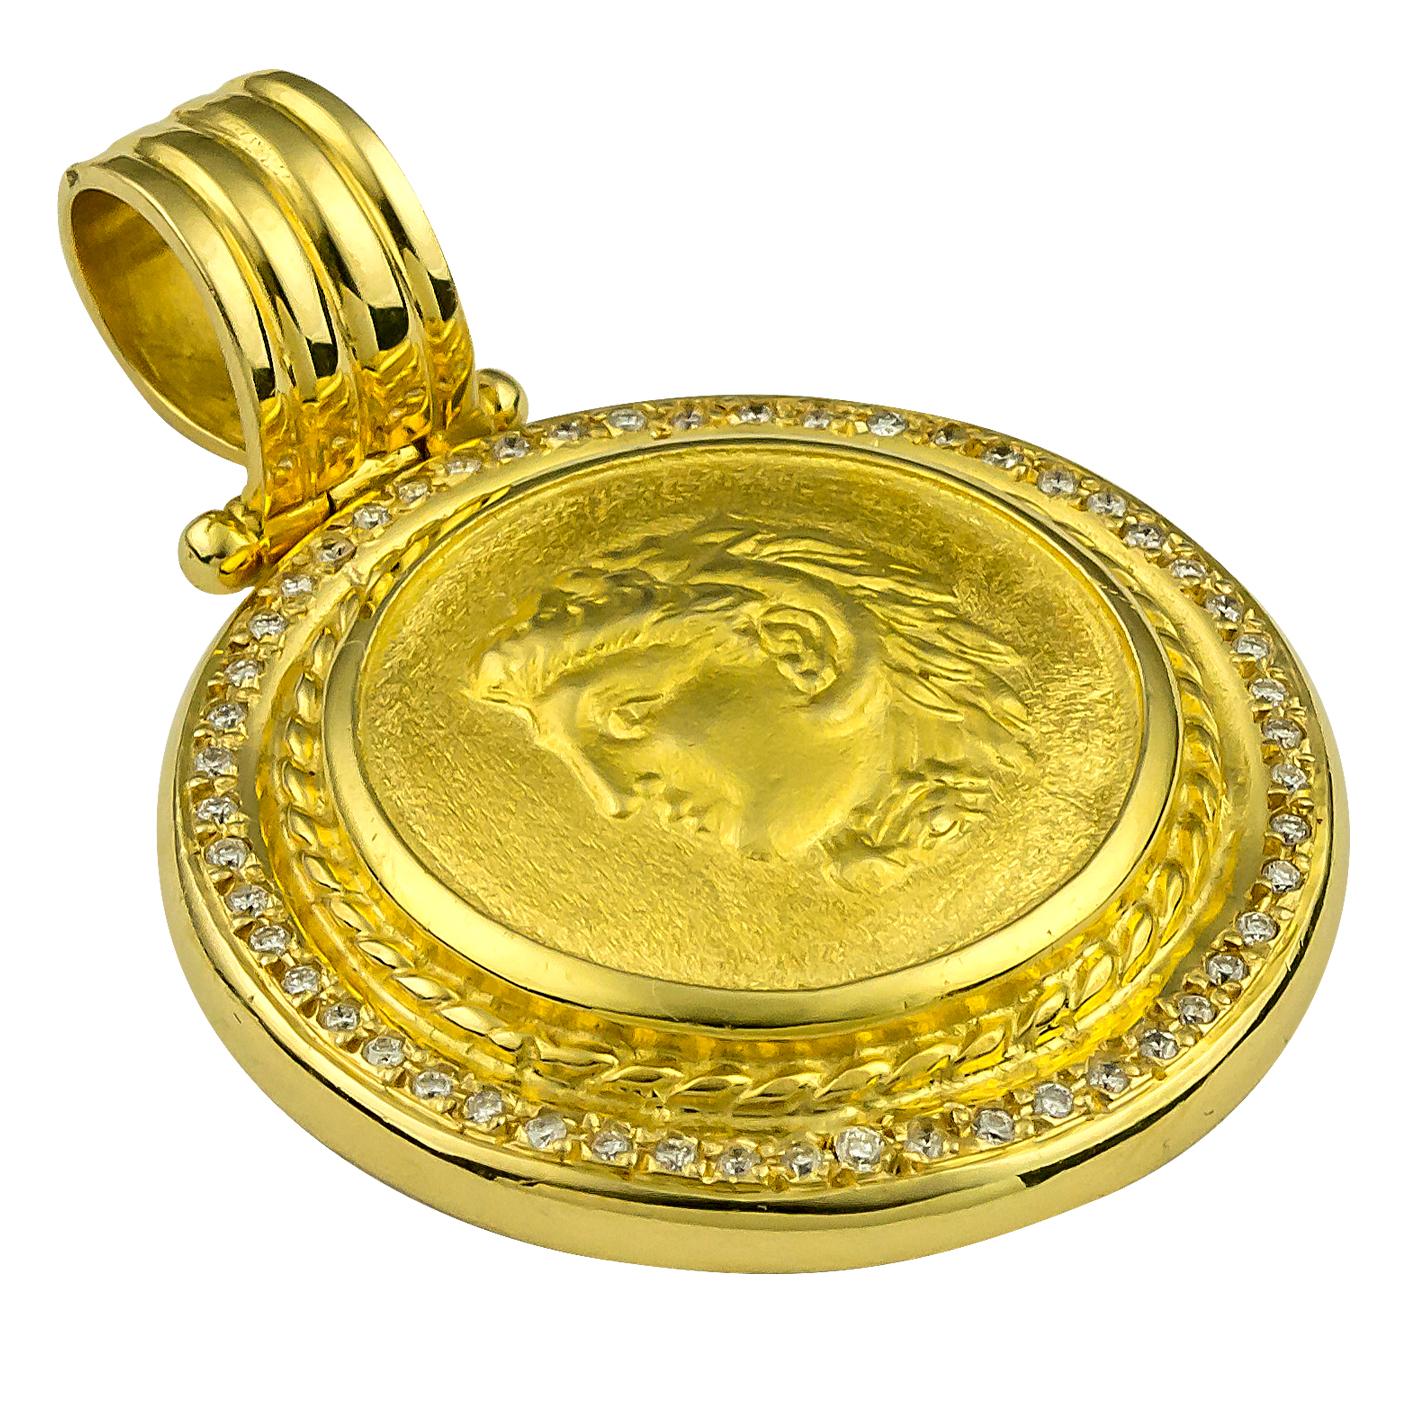 This S.Georgios designer 18 Karat Yellow Gold Diamond Coin Pendant is all handmade and features a Gold Coin of Alexander the Great, (the coin is an exact copy of the original) the Symbol of Strength and has Brilliant cut Diamonds around the coin